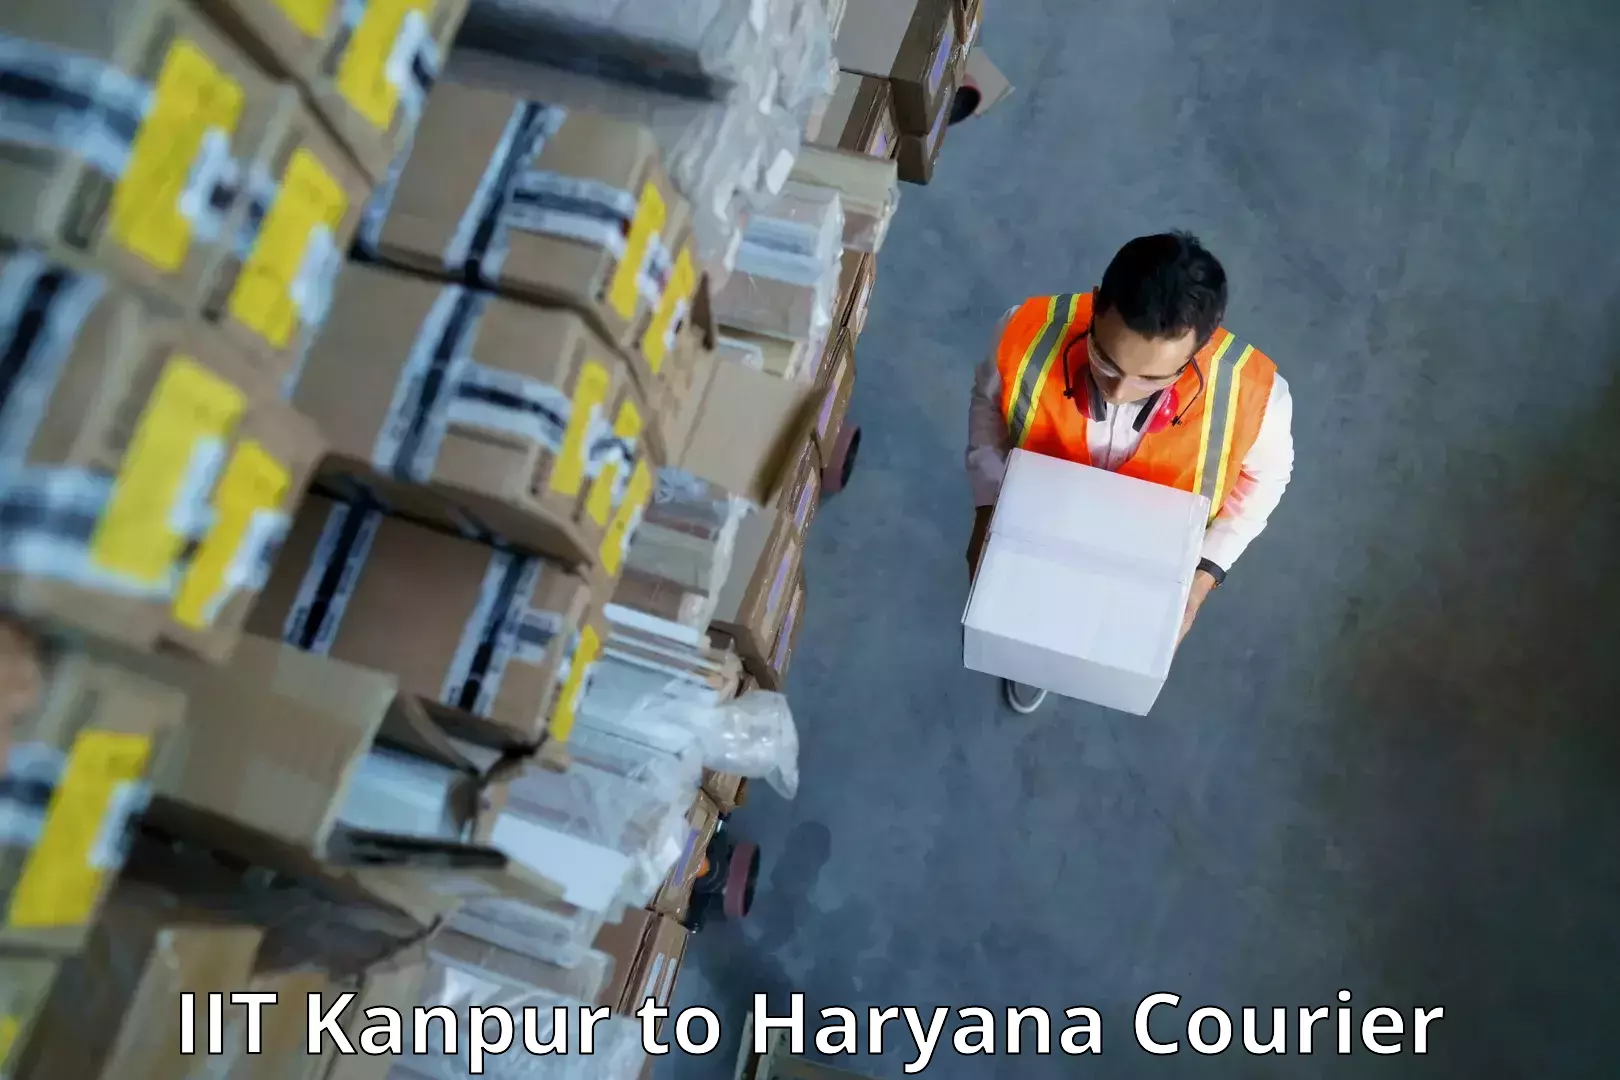 Cash on delivery service IIT Kanpur to Haryana